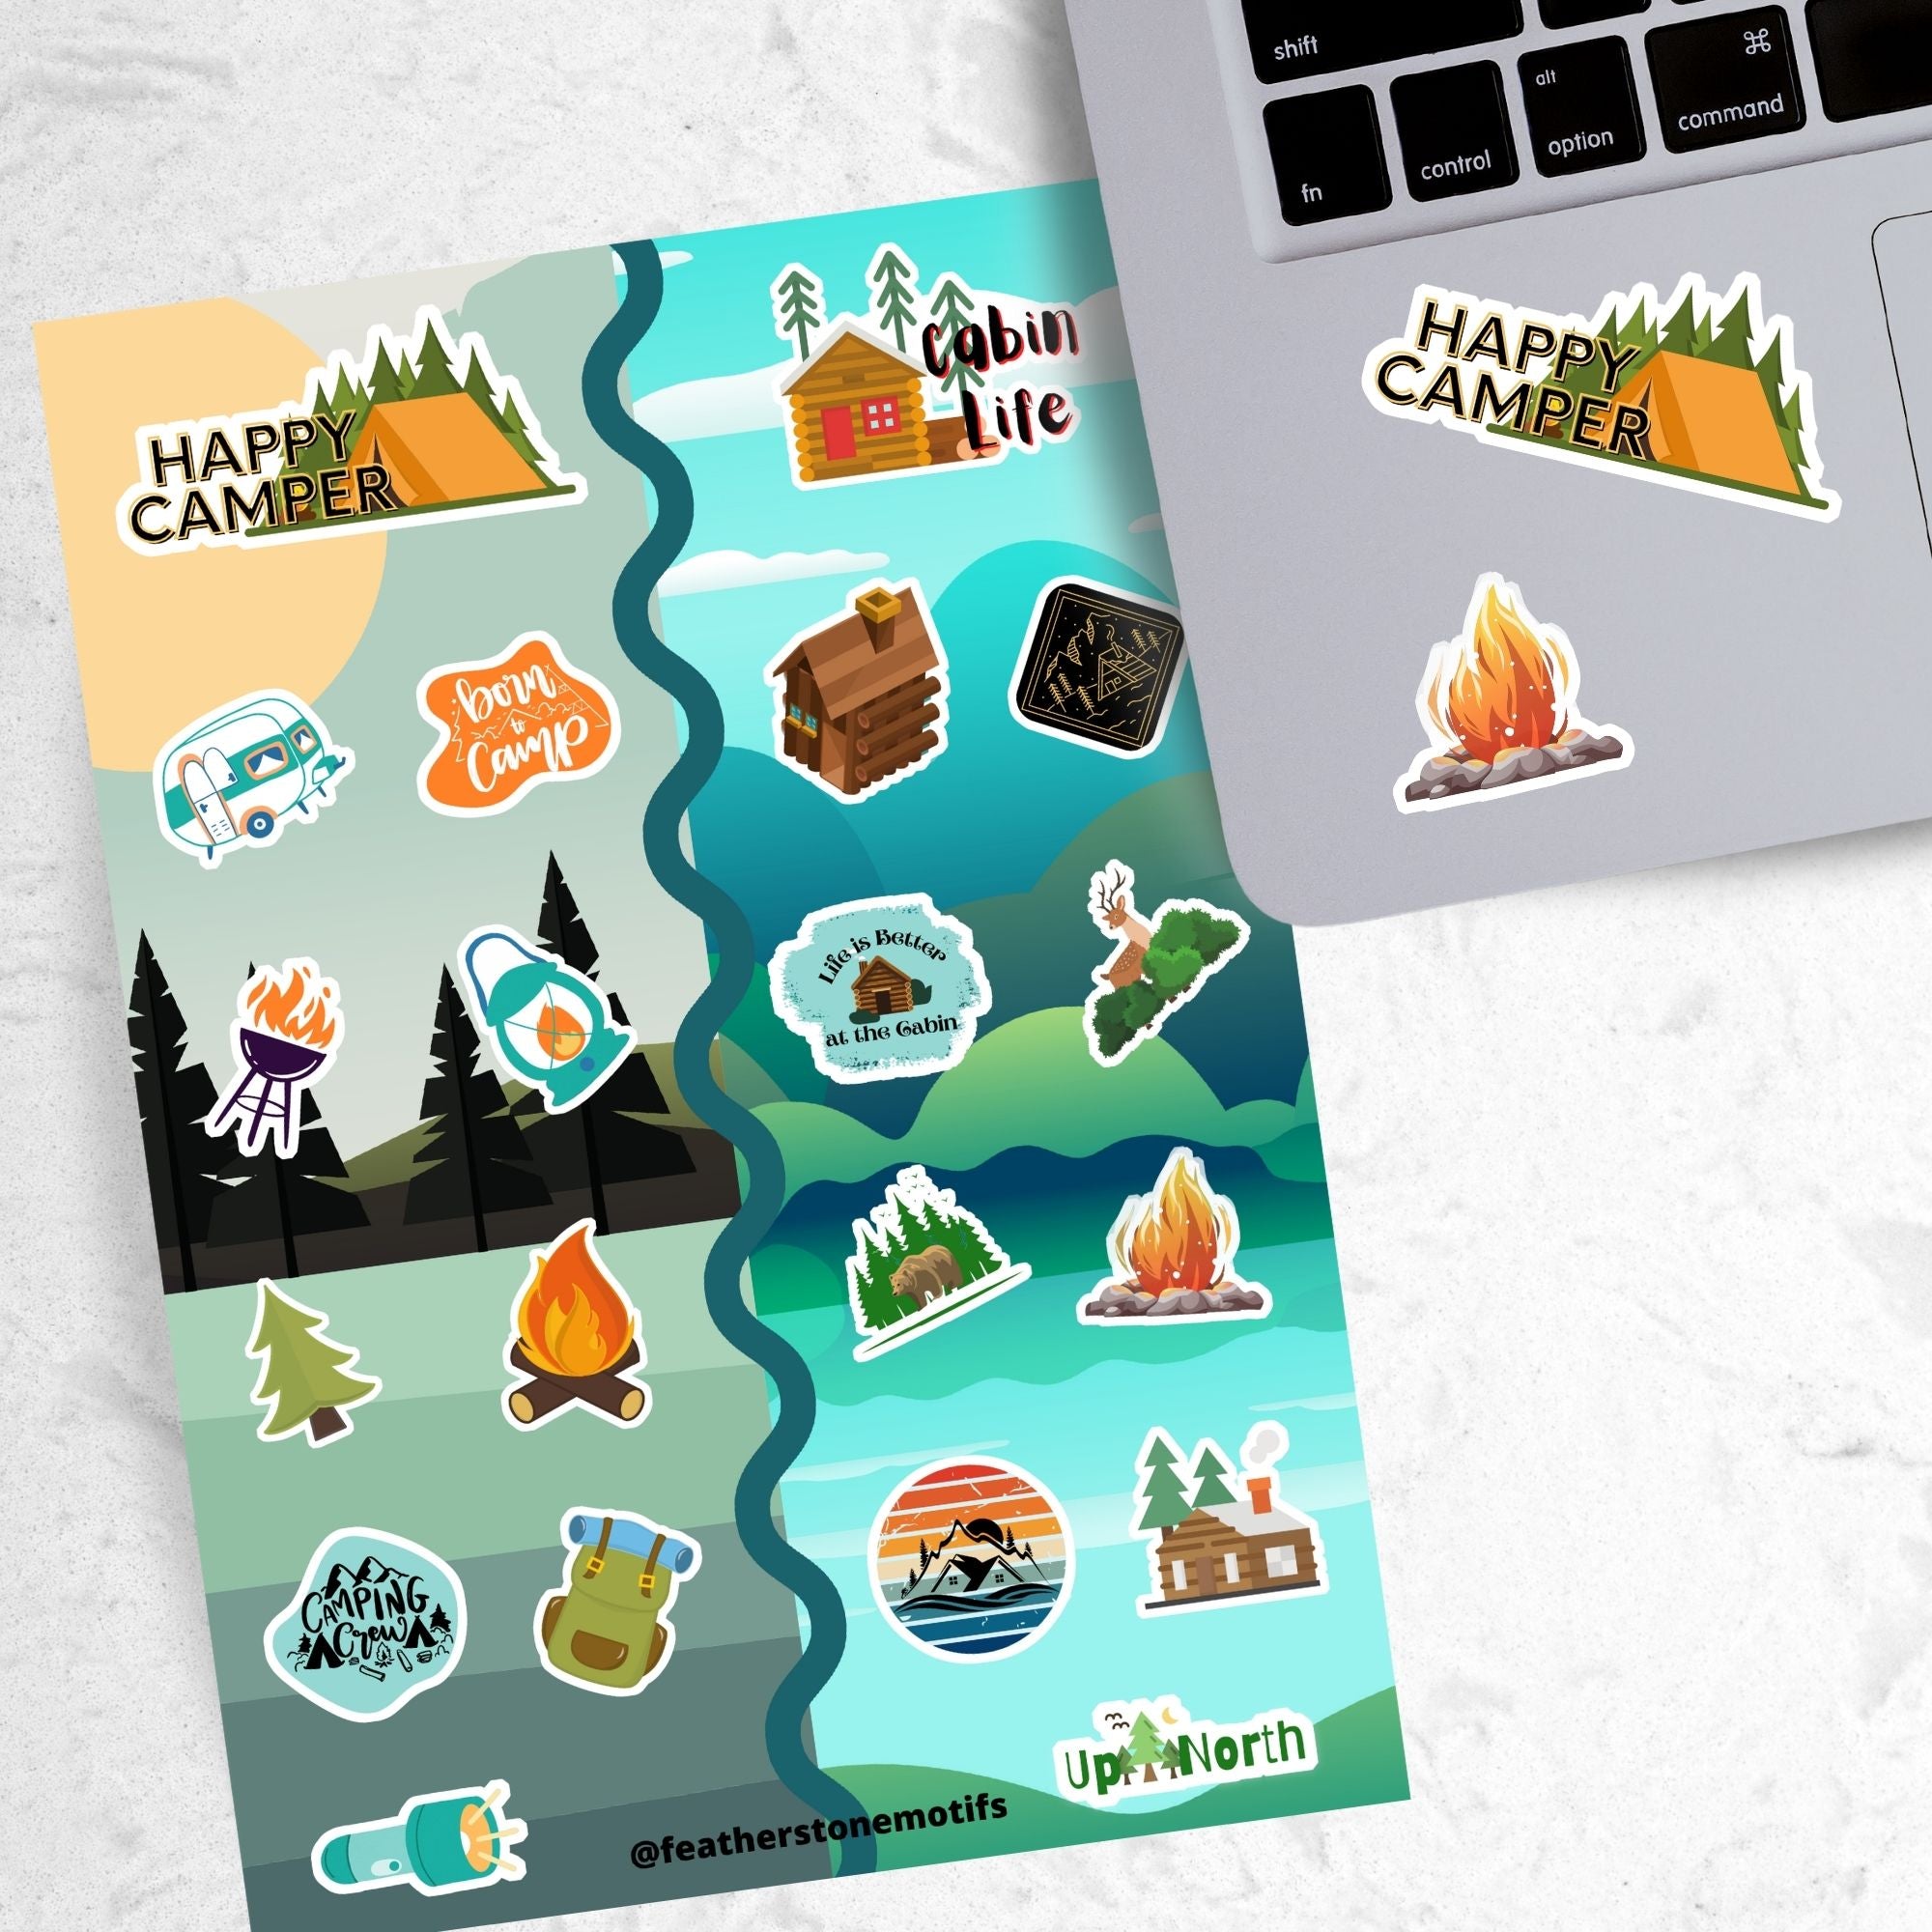 Get away to the woods, mountains, or beach with this sticker sheet! This sticker sheet has sticker images for camping in a tent or camper, or in a cabin or cottage. This image shows the sticker sheet next to an open laptop with the Happy Camper header showing a tent, and a campfire, stickers applied below the keyboard.